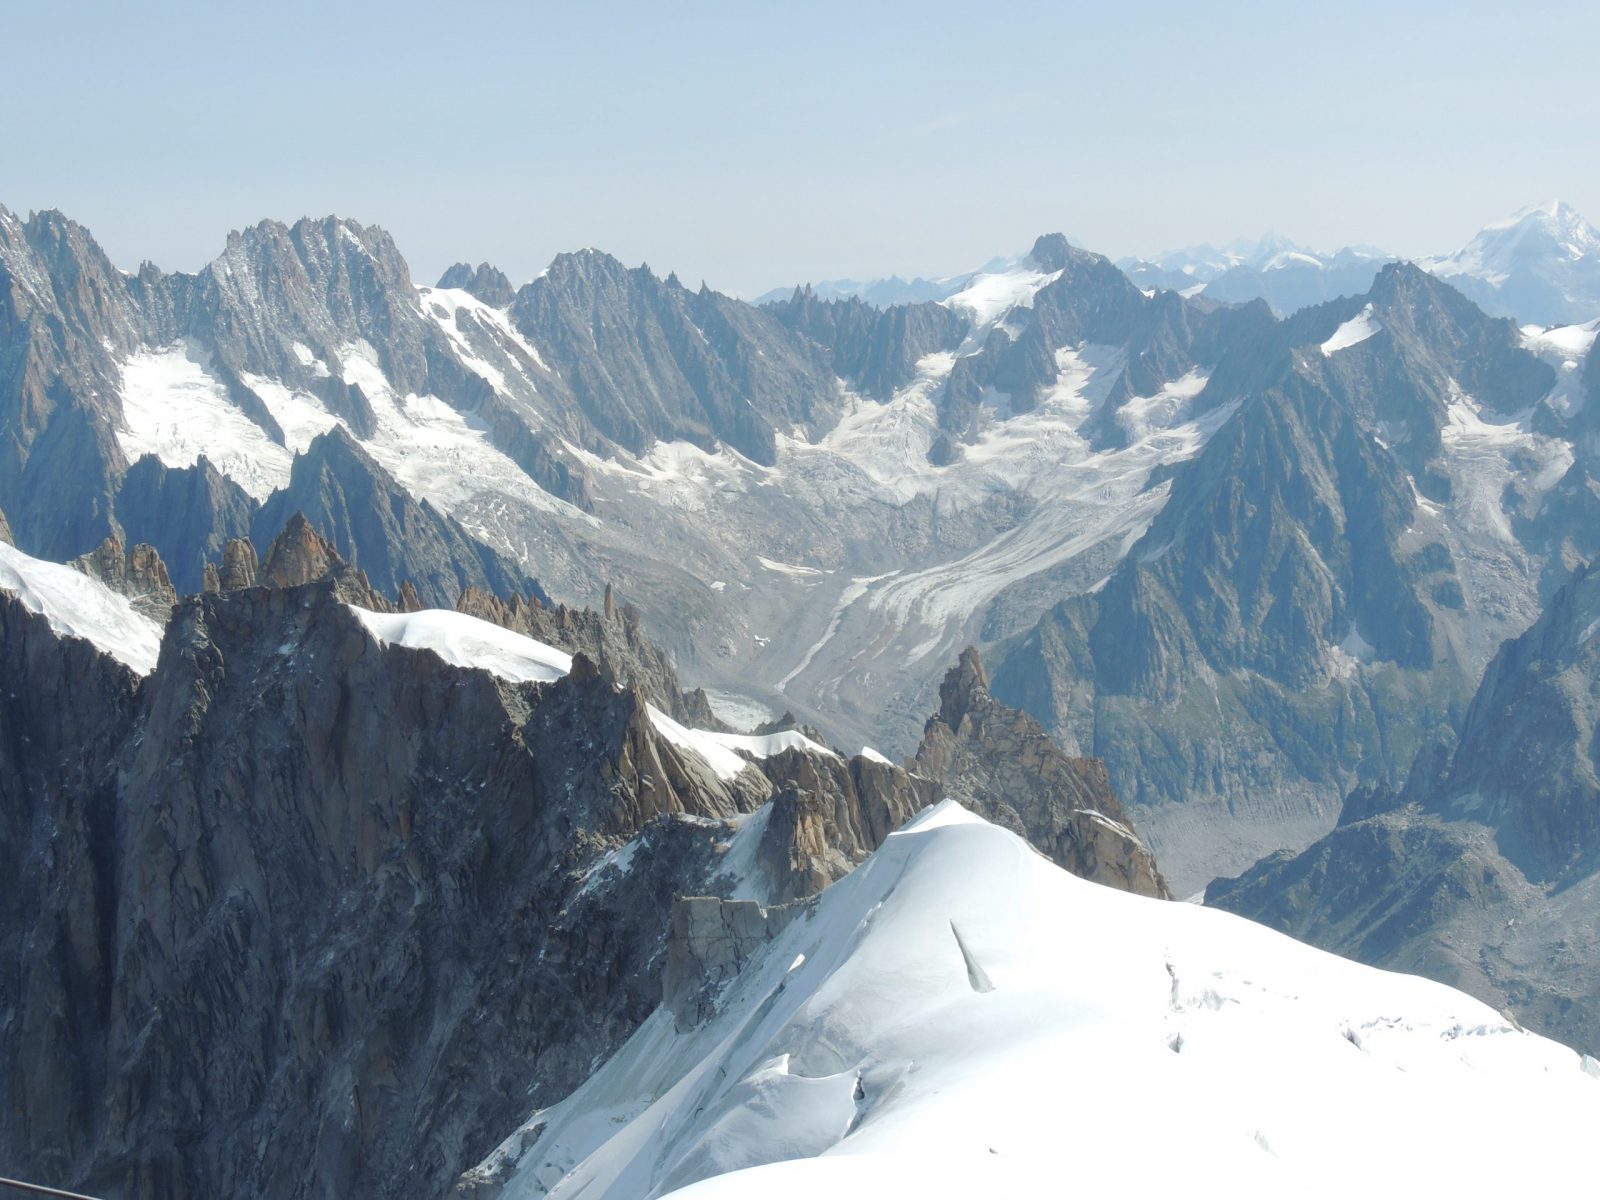 The views from Aiguille du Midi are impressive, even though the structure looks a bit old, the views is what you pay for. And it is really worth it. Aiguille du Midi vs Punta Helbronner – which one you should do?